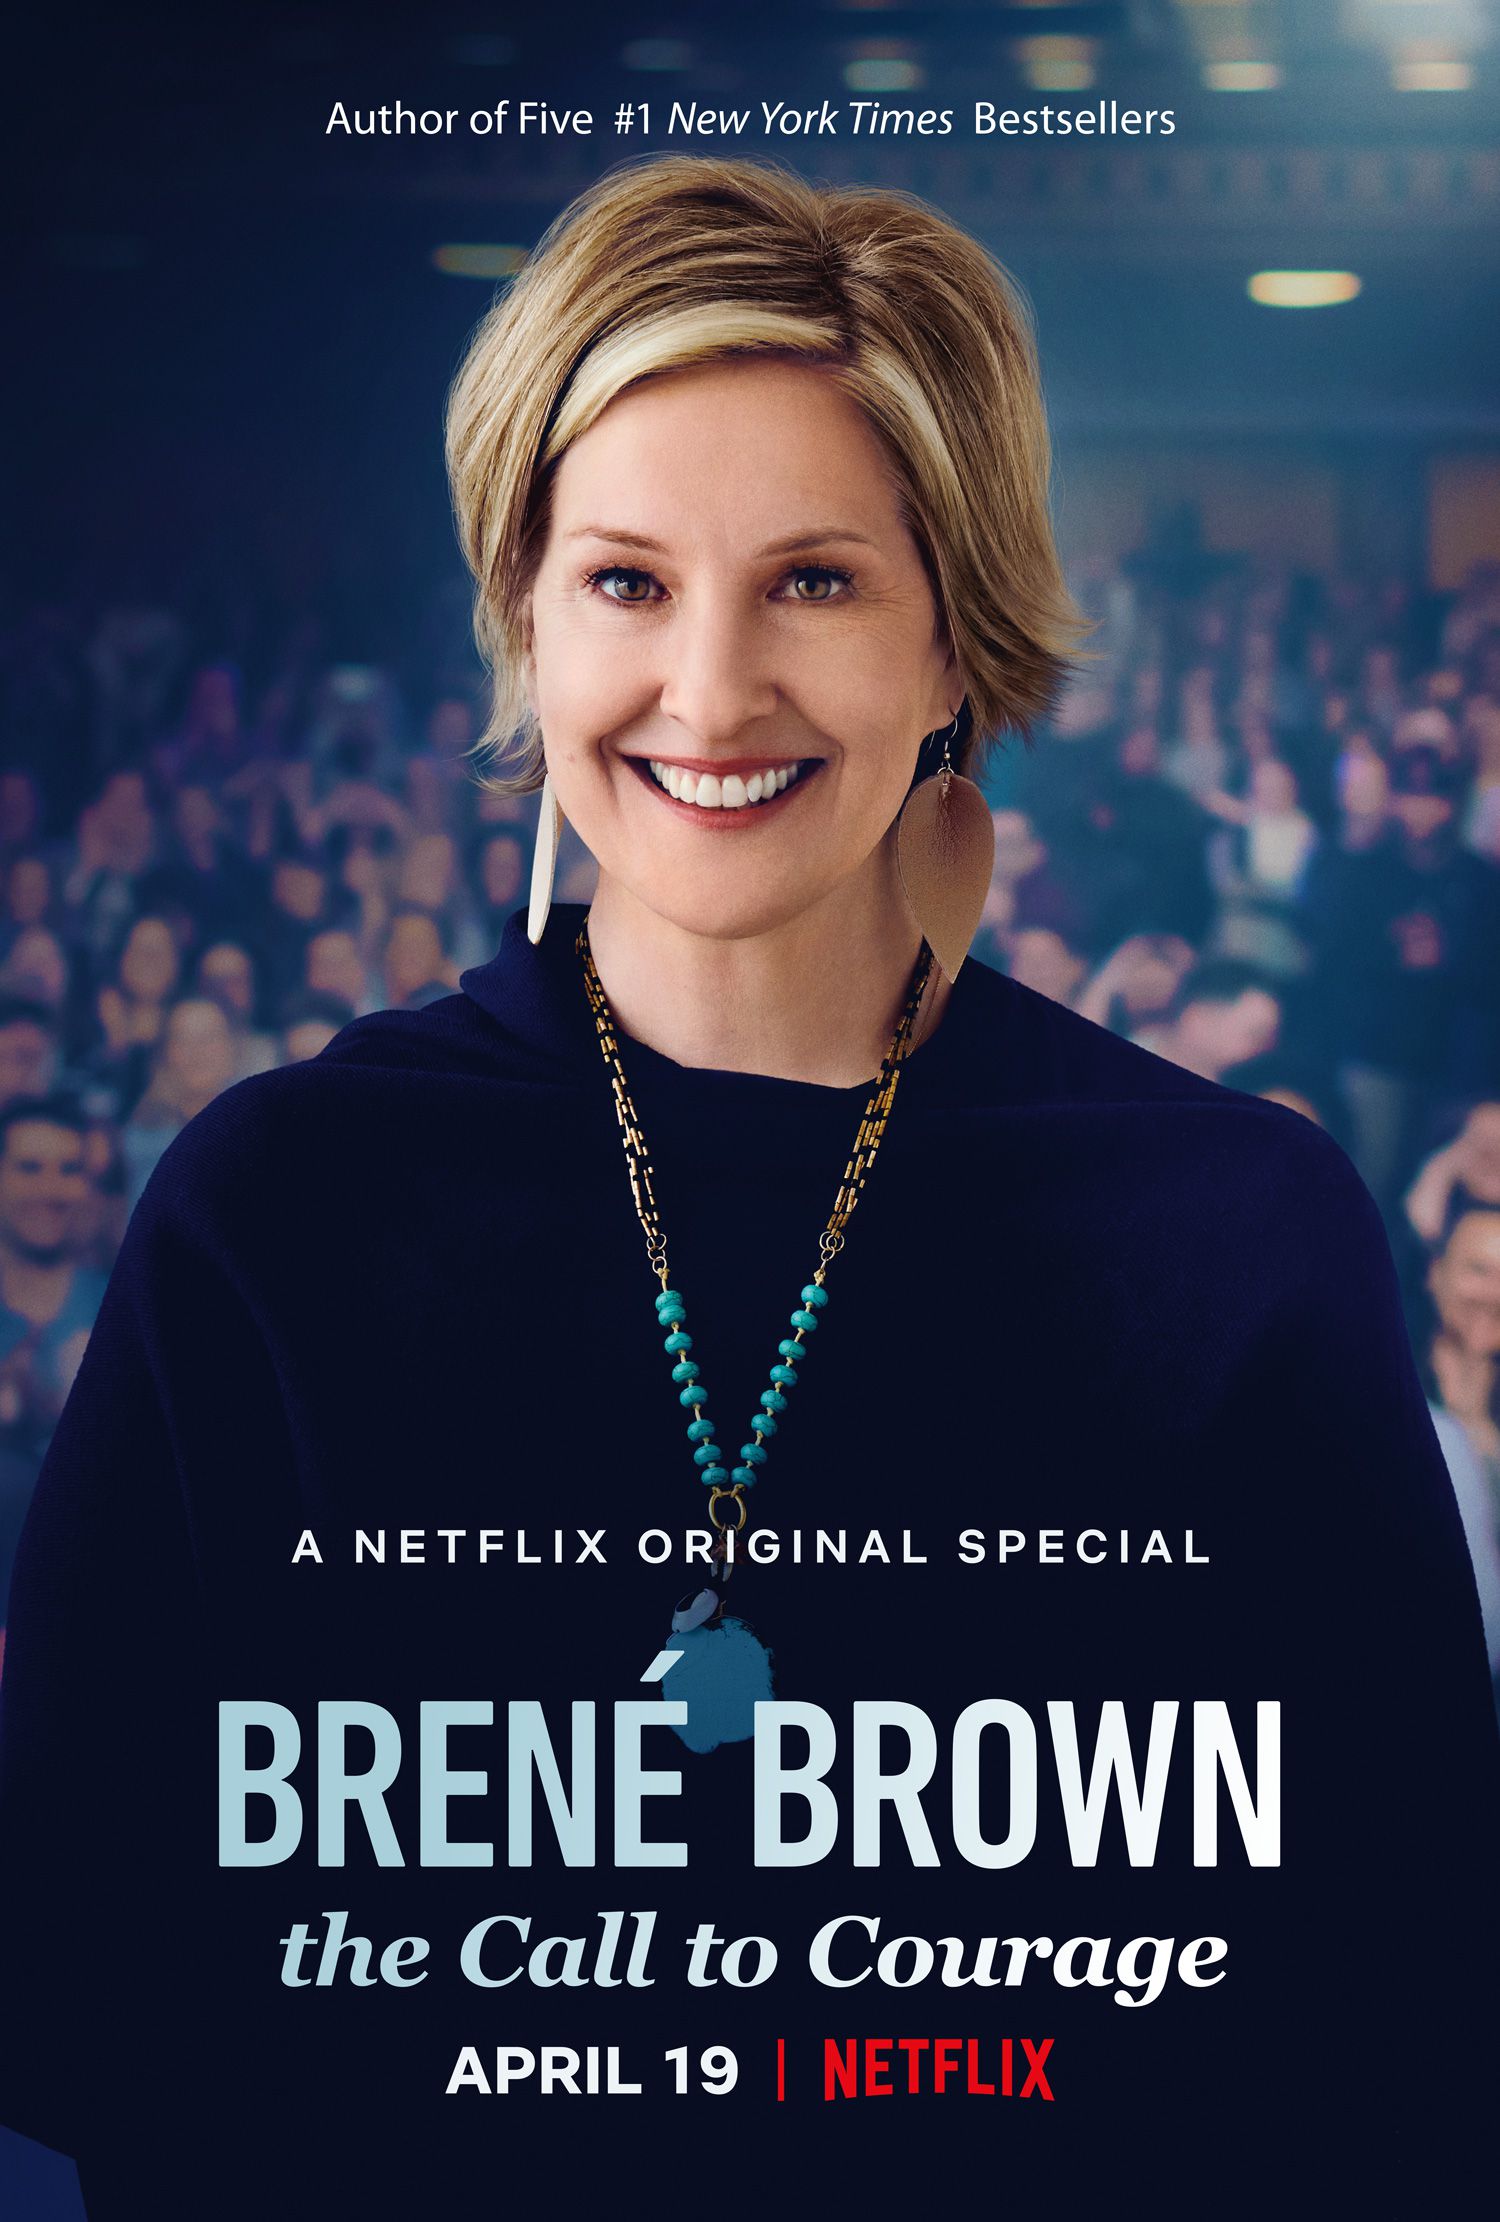 Brene brown: The call to courage movie poster